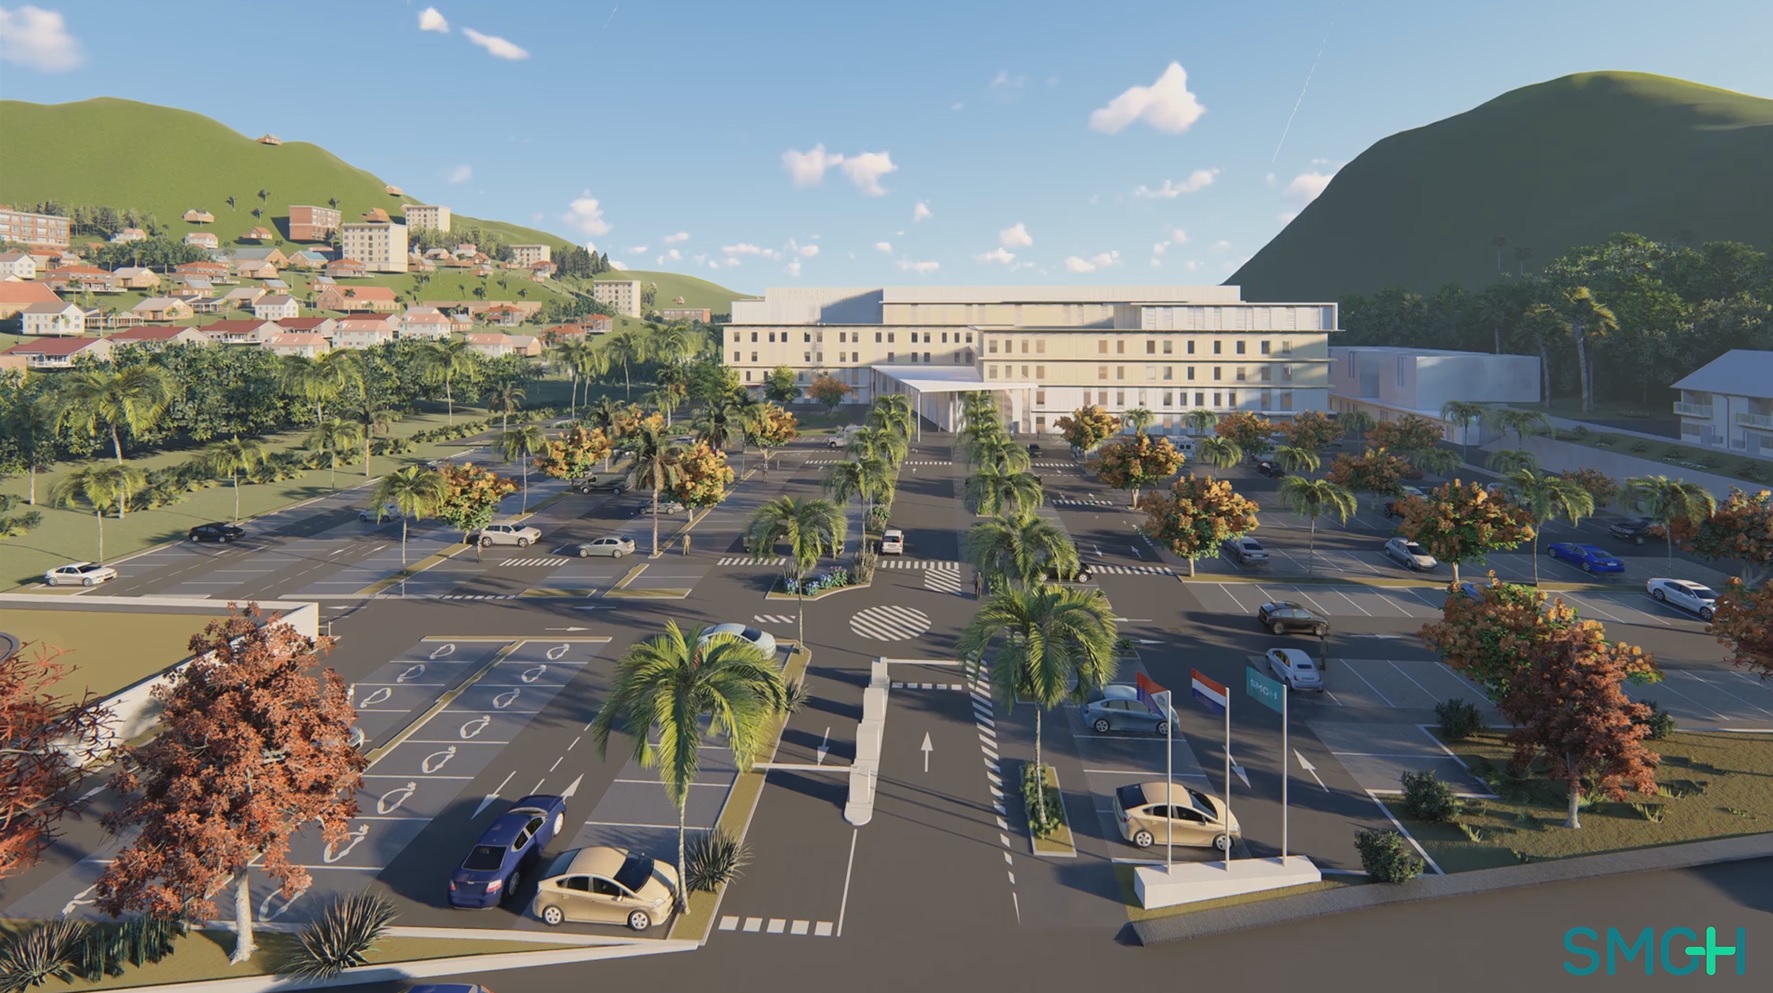 Virtual tour of St. Maarten General Hospital launched